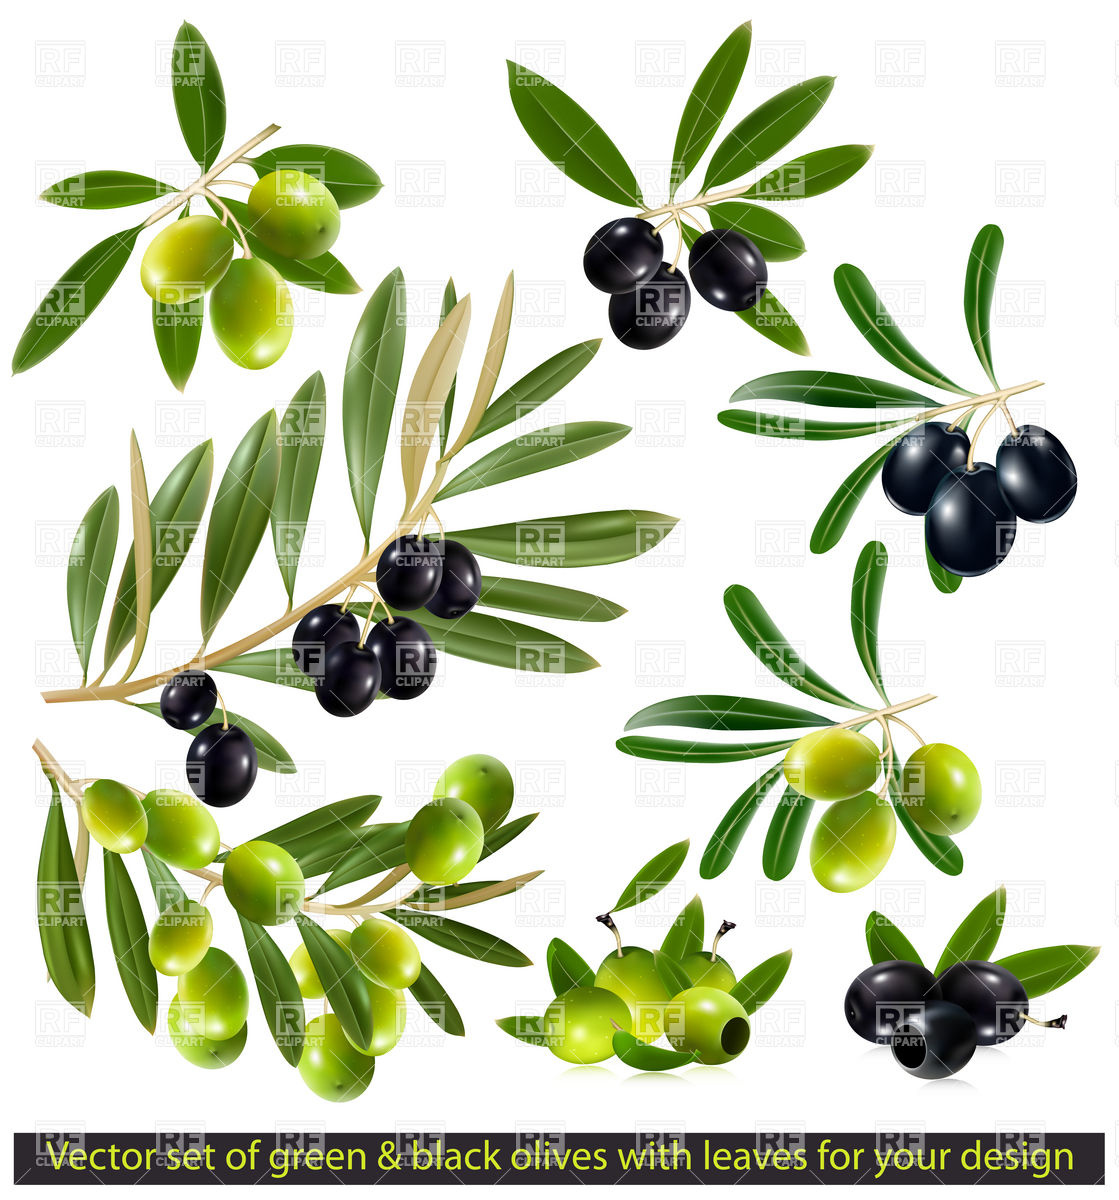 Black Olive Twig With Leaves Download Royalty Free Vector Clipart